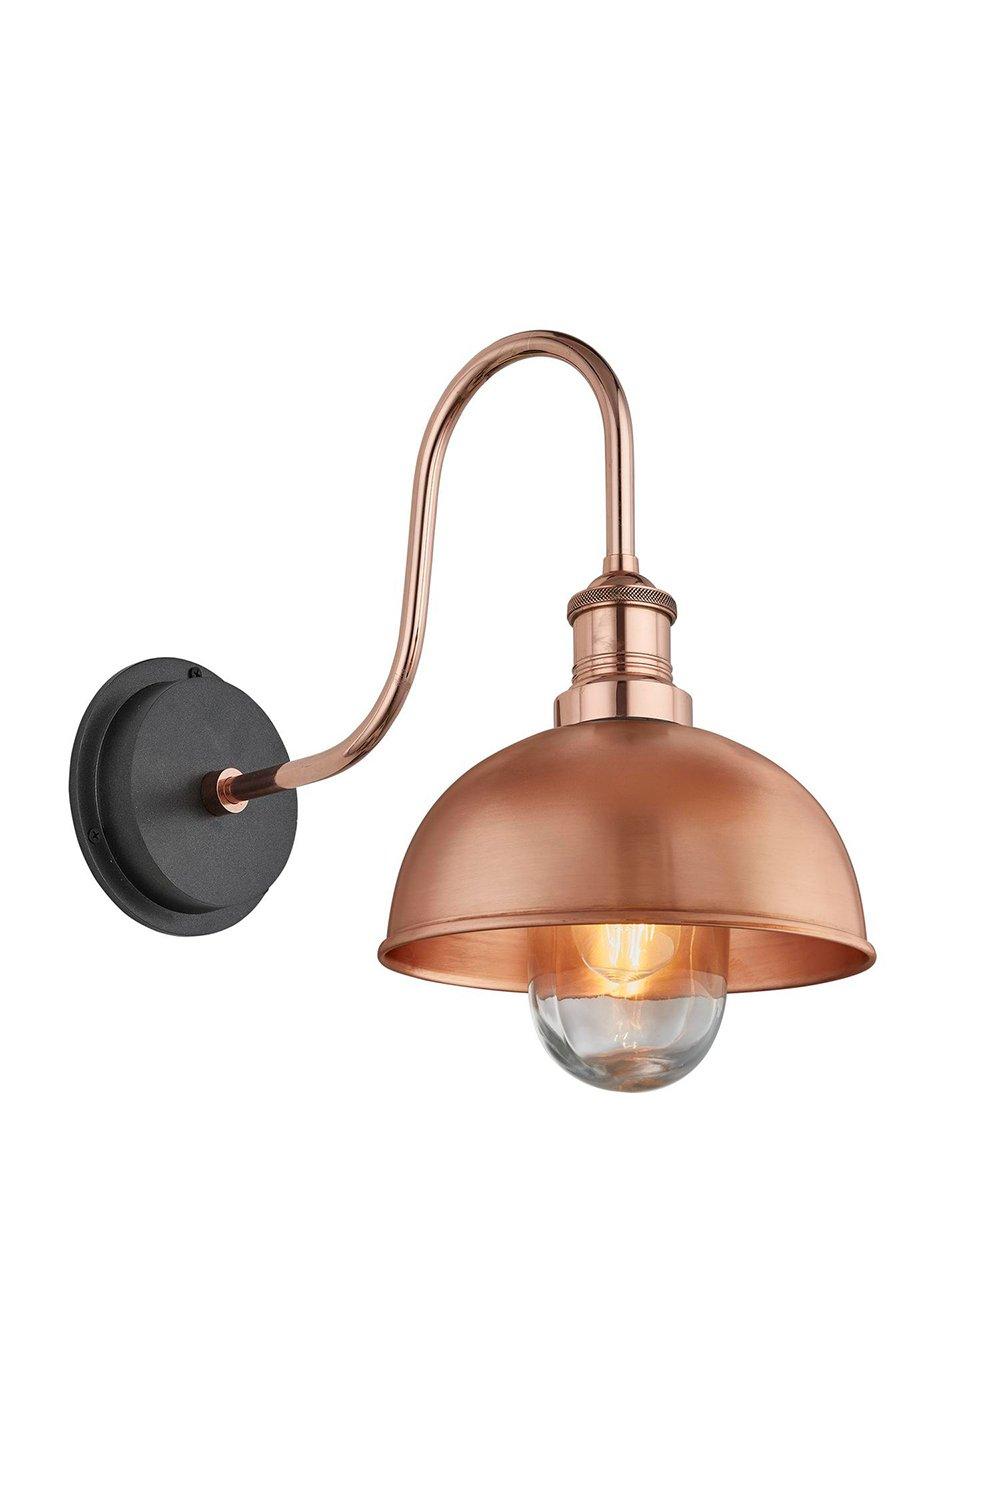 Swan Neck Outdoor & Bathroom Dome Wall Light, 8 Inch, Copper, Copper Holder